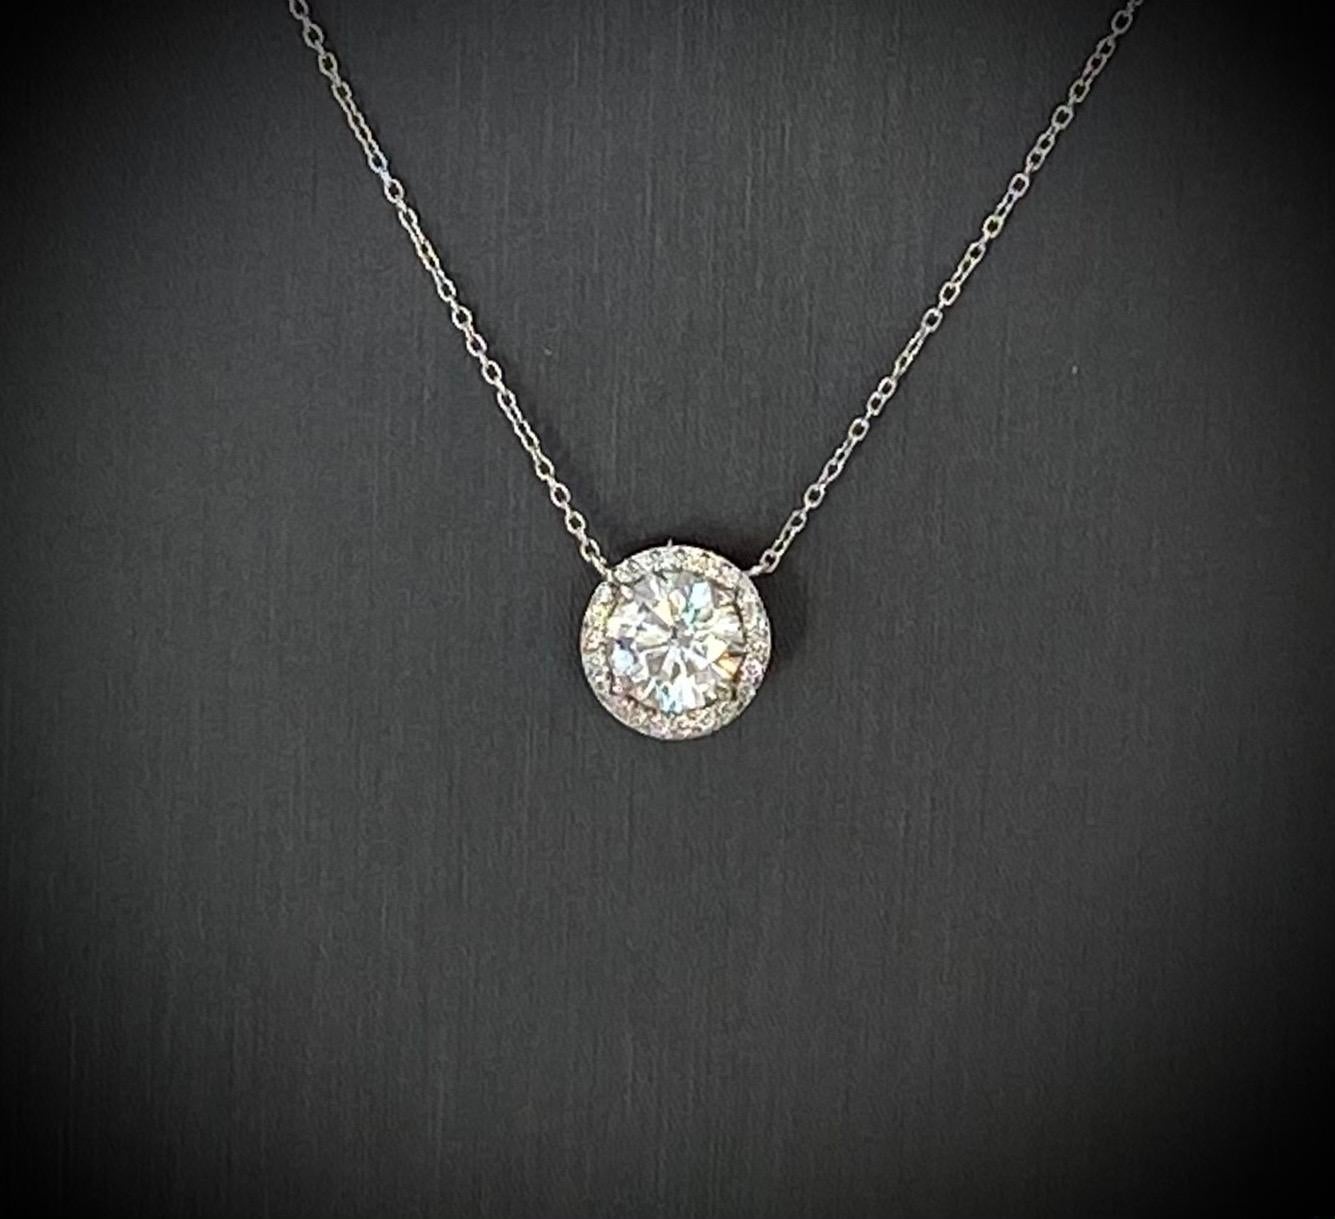 A stunning round brilliant cut diamond pendant with diamond surround set in platinum. The center diamond weighs 2.02 carats, is assessed as D color and SI1 clarity via GIA certificate. The stone is set in an elegant diamond surround finished with a